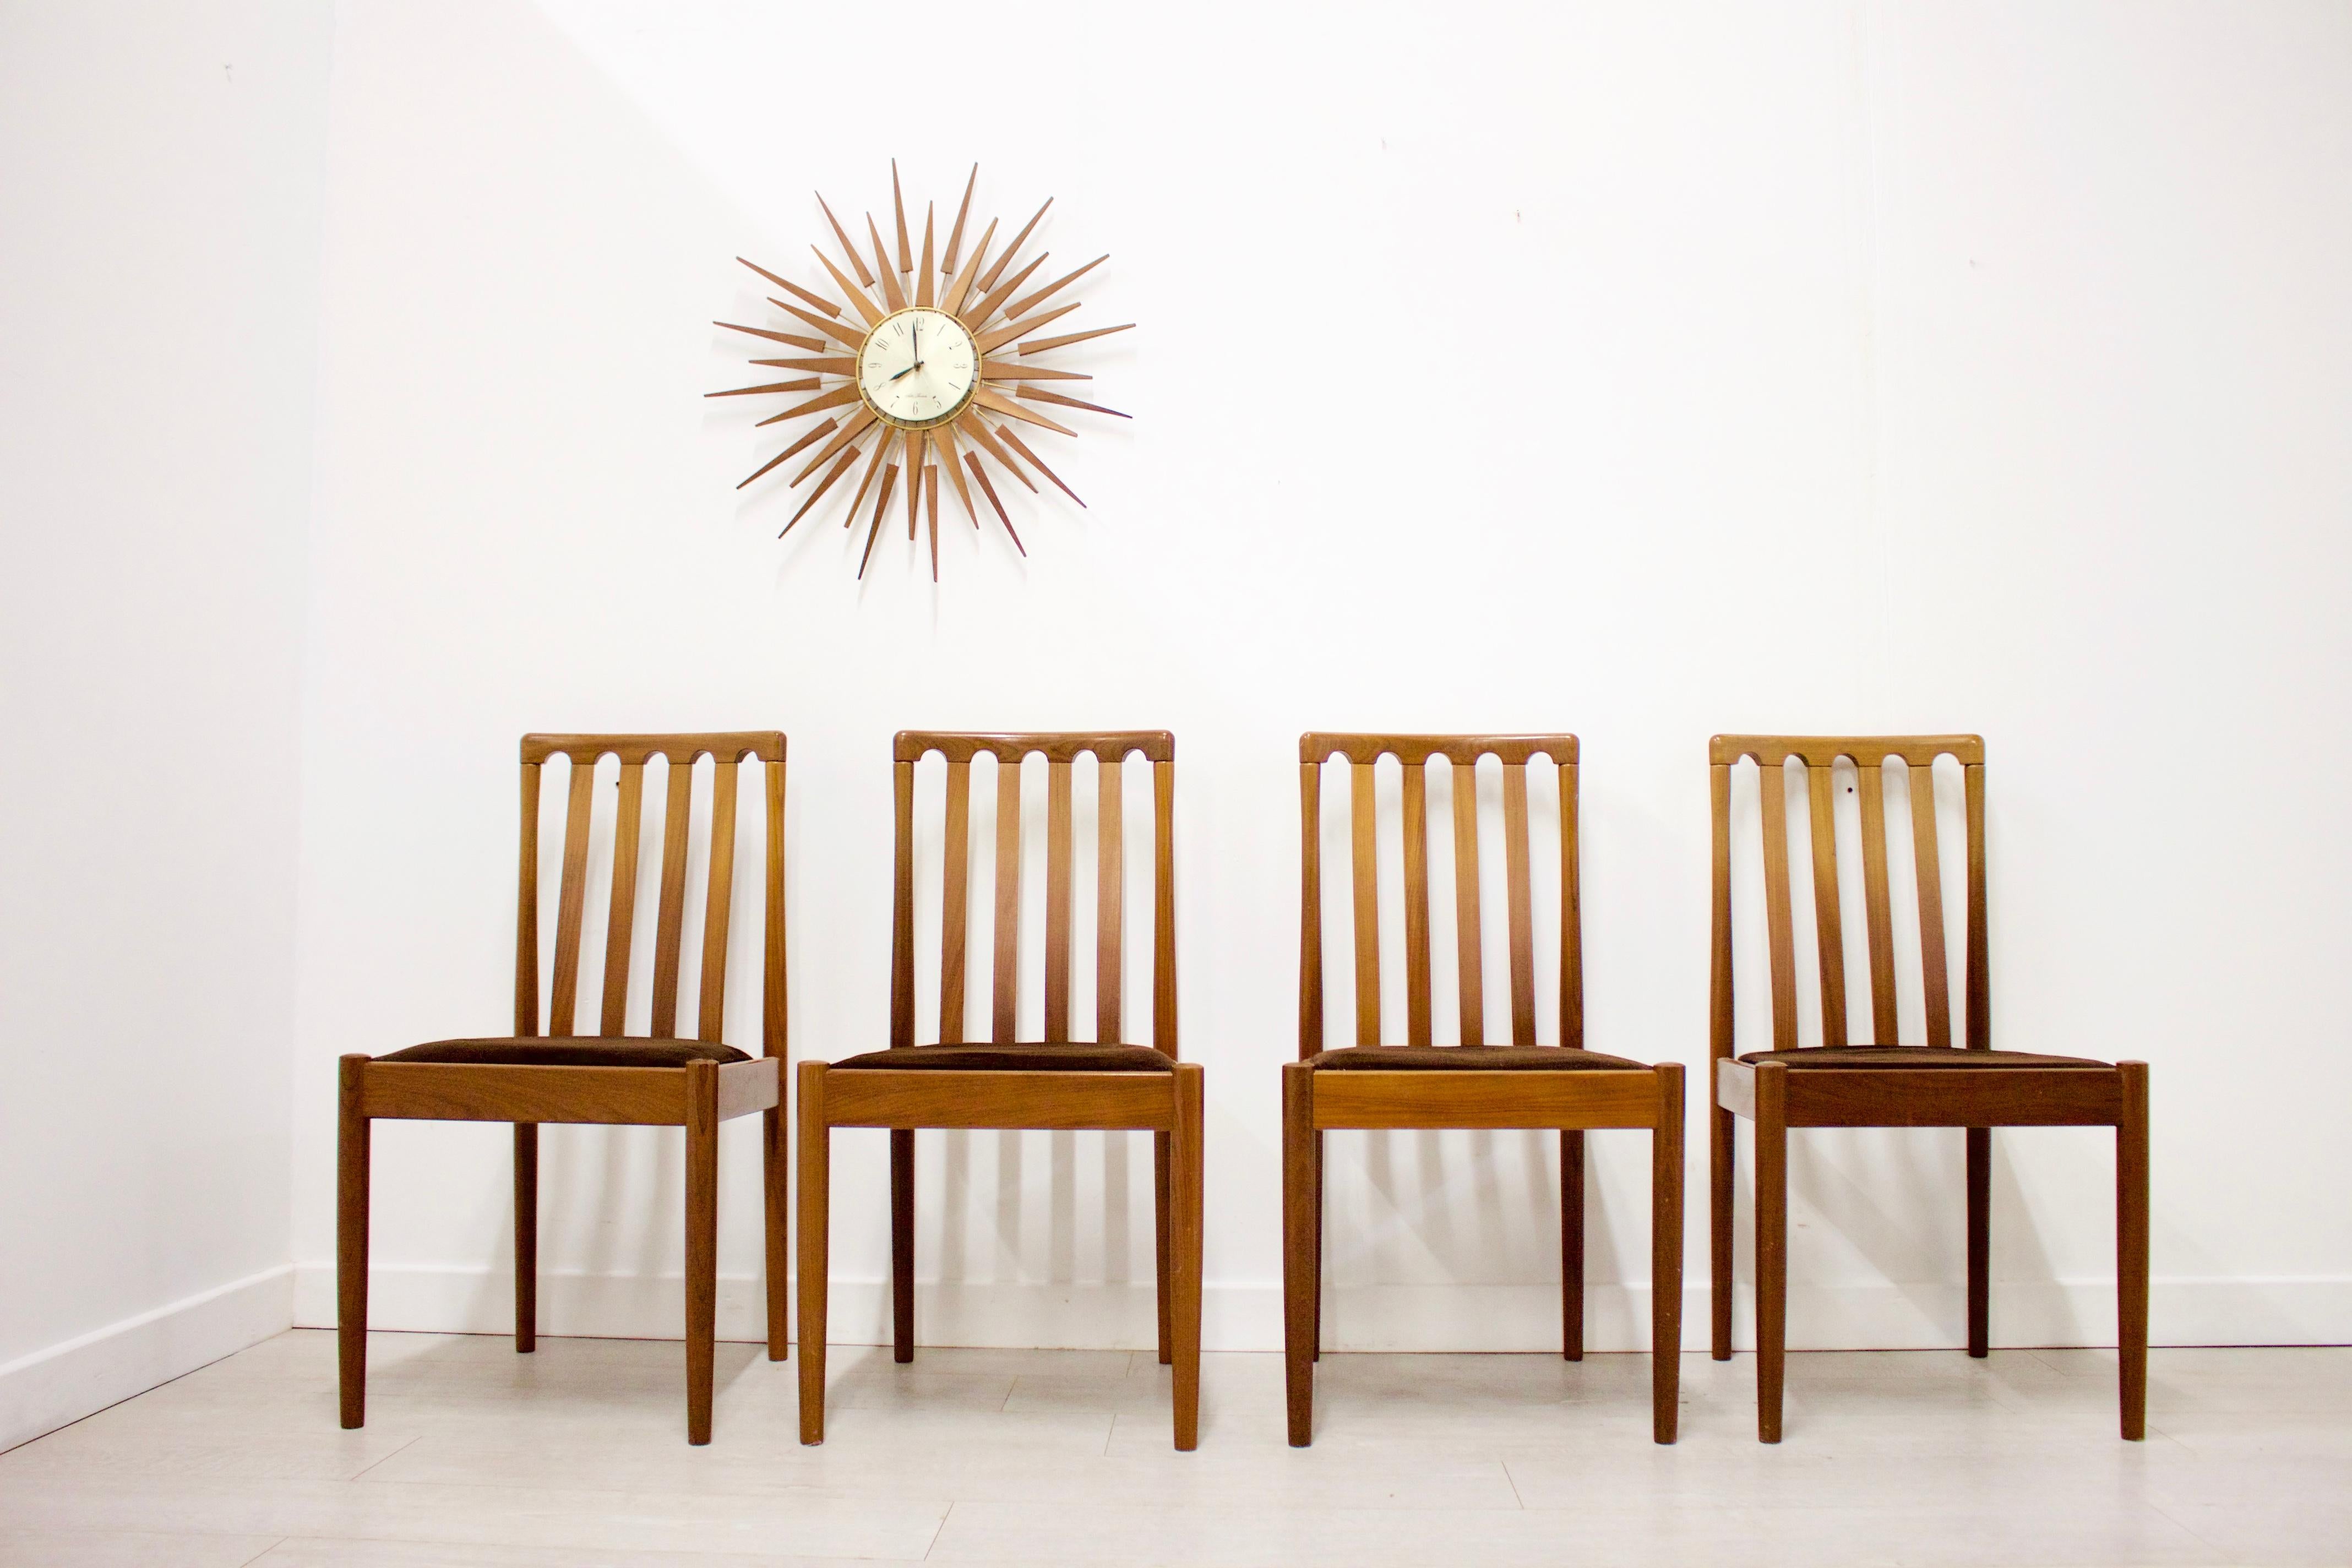 - Mid-Century Modern set of 4 dining chairs
- Made by Meredew
- Featuring brown upholstery
- Made from teak
- Measures: Seat height 44.5 cm.